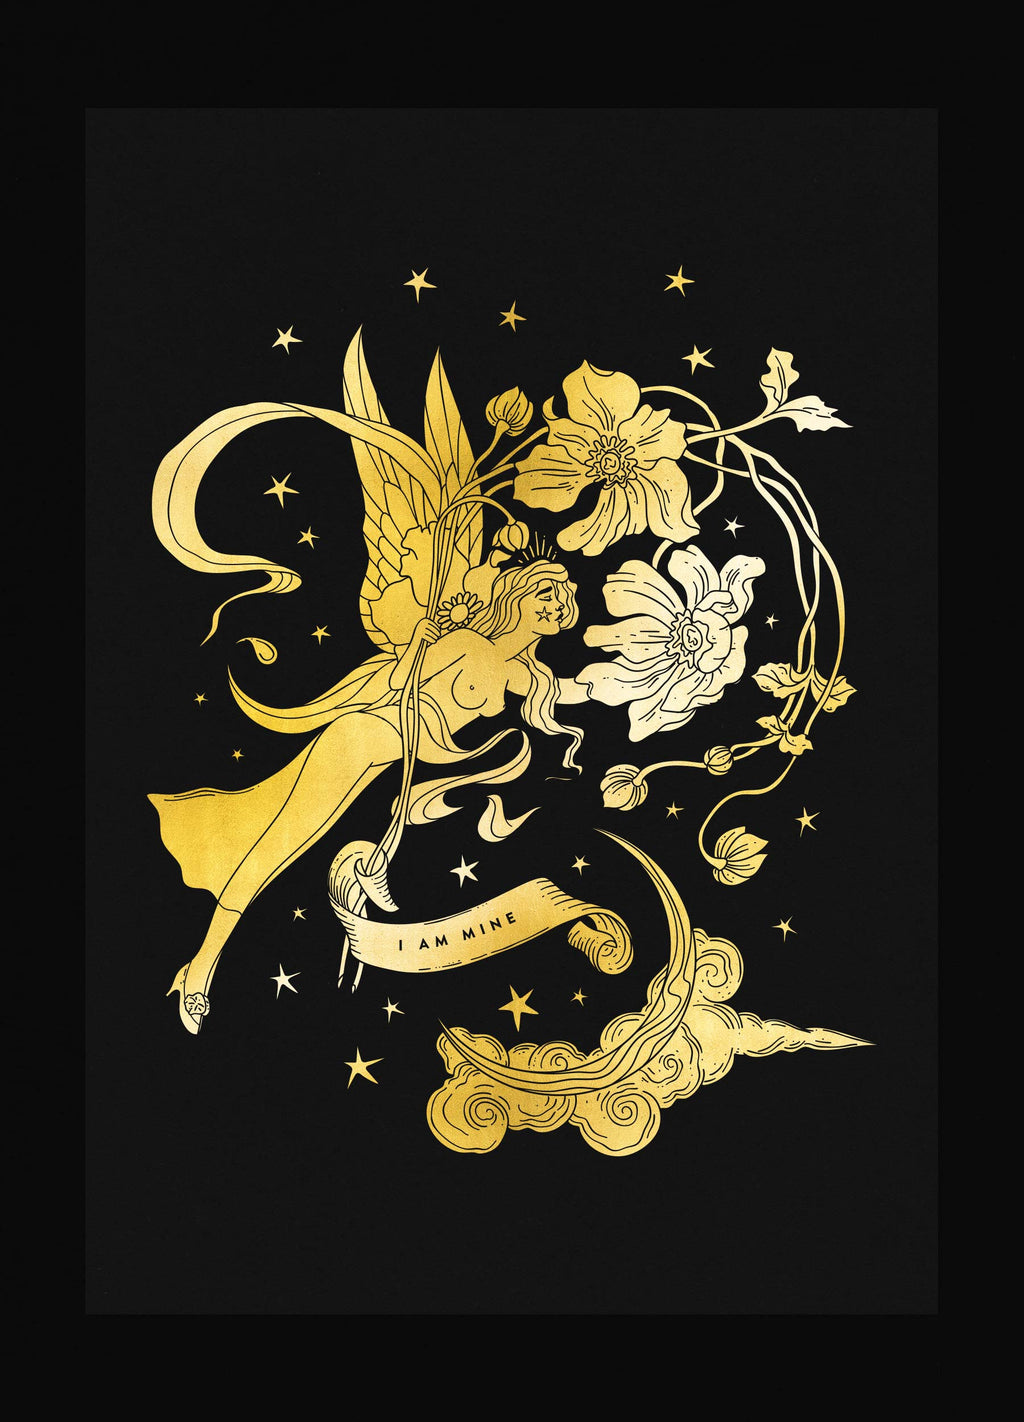 Flower Fairy art print by Cocorrina & Co in gold foil on black paper